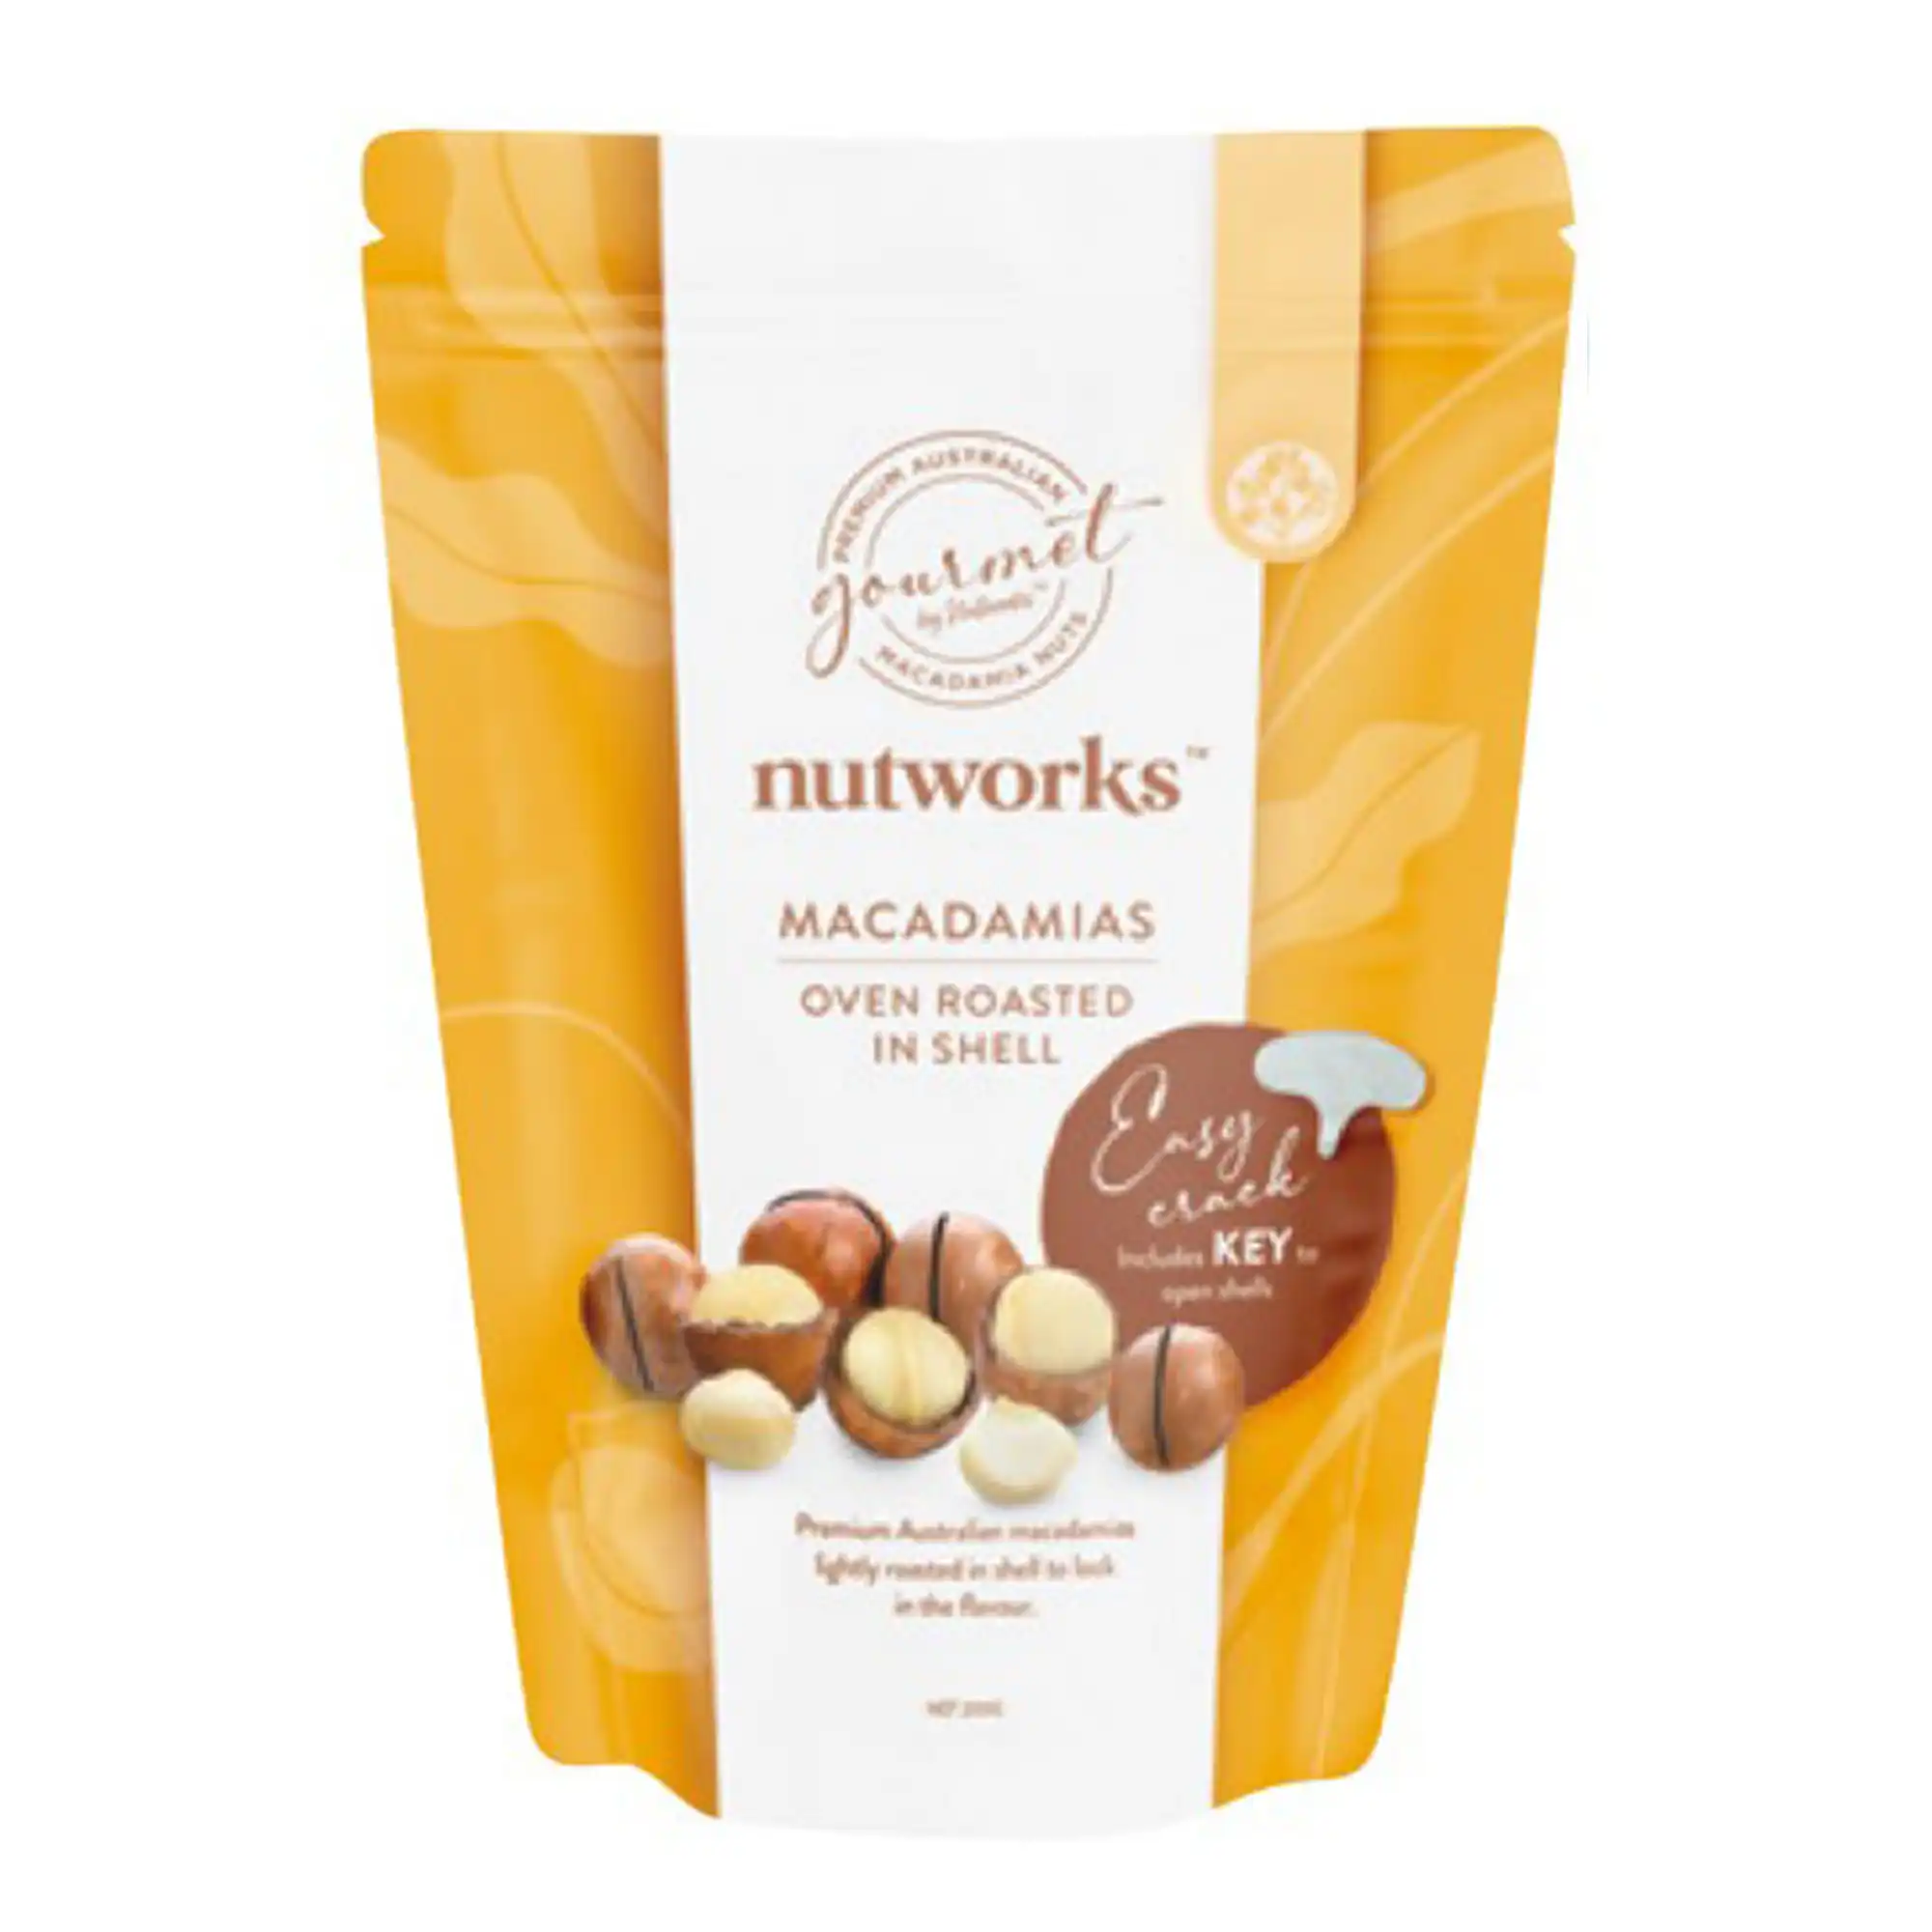 Nutworks Oven Roasted Nut in Shell Macadamias SUP 200g